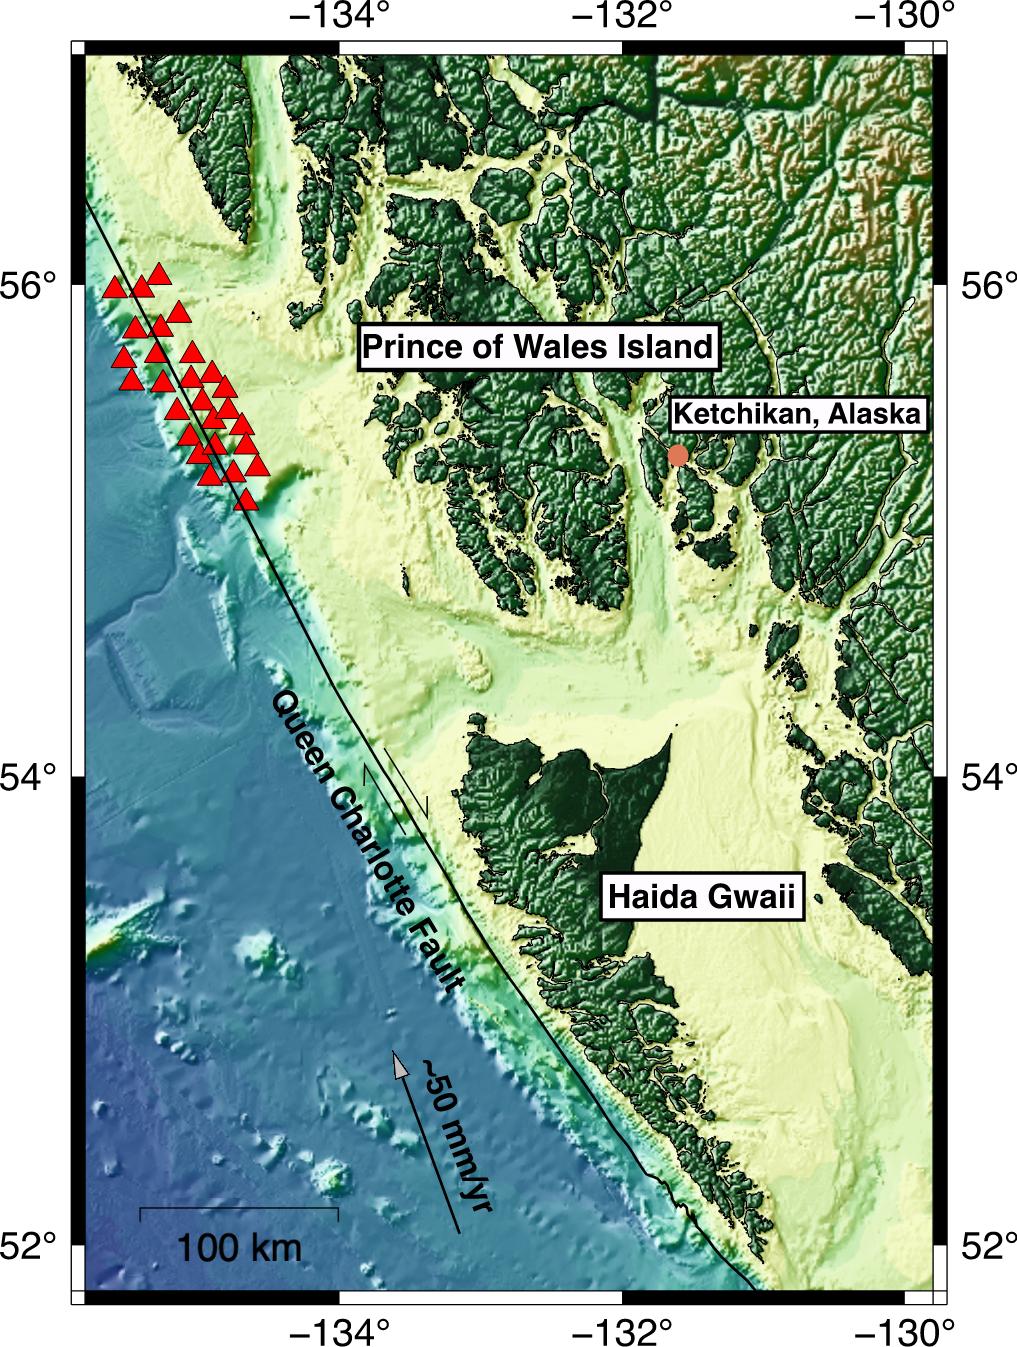 Map of the study area. Red triangles: 28 OBS sites deployed this summer. The research cruise set sail from Ketchikan deployed and deployed OBS offshore Prince of Wales Island. The 50 mm/yr arrow indicates the relative plate motion between the Pacific and North America tectonic plates.